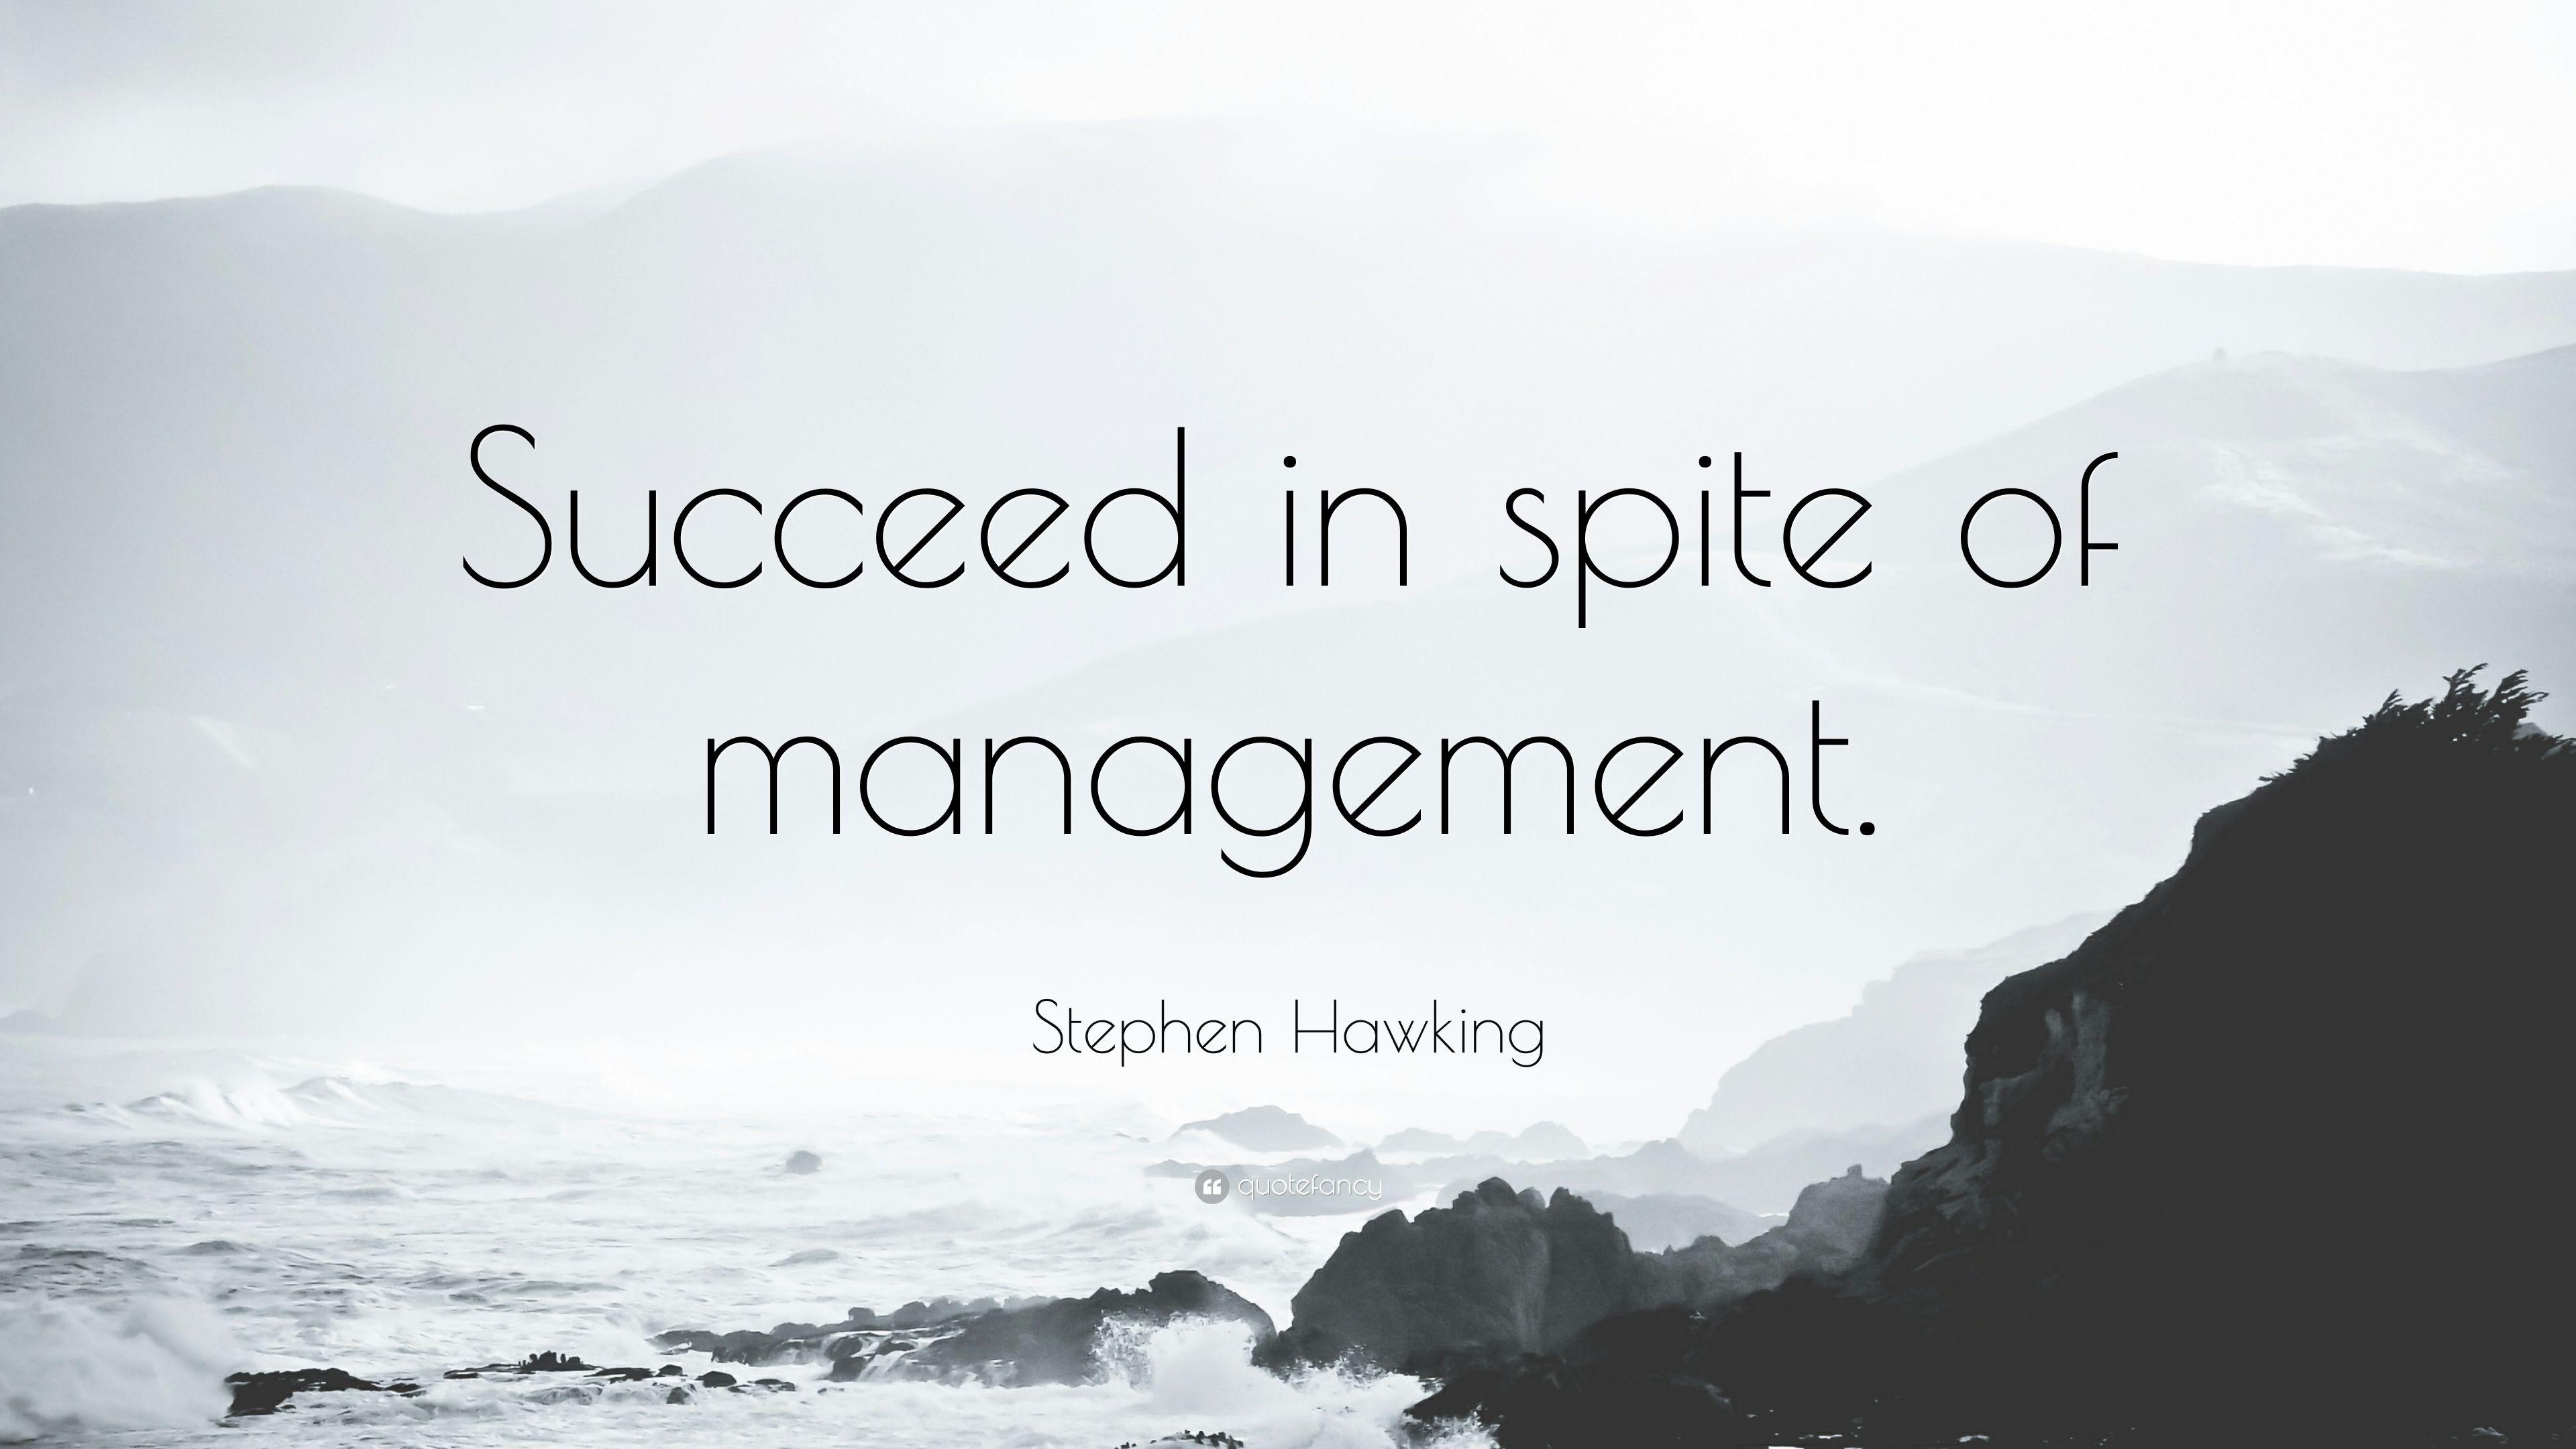 Stephen Hawking Quote: “Succeed in spite of management.” 12